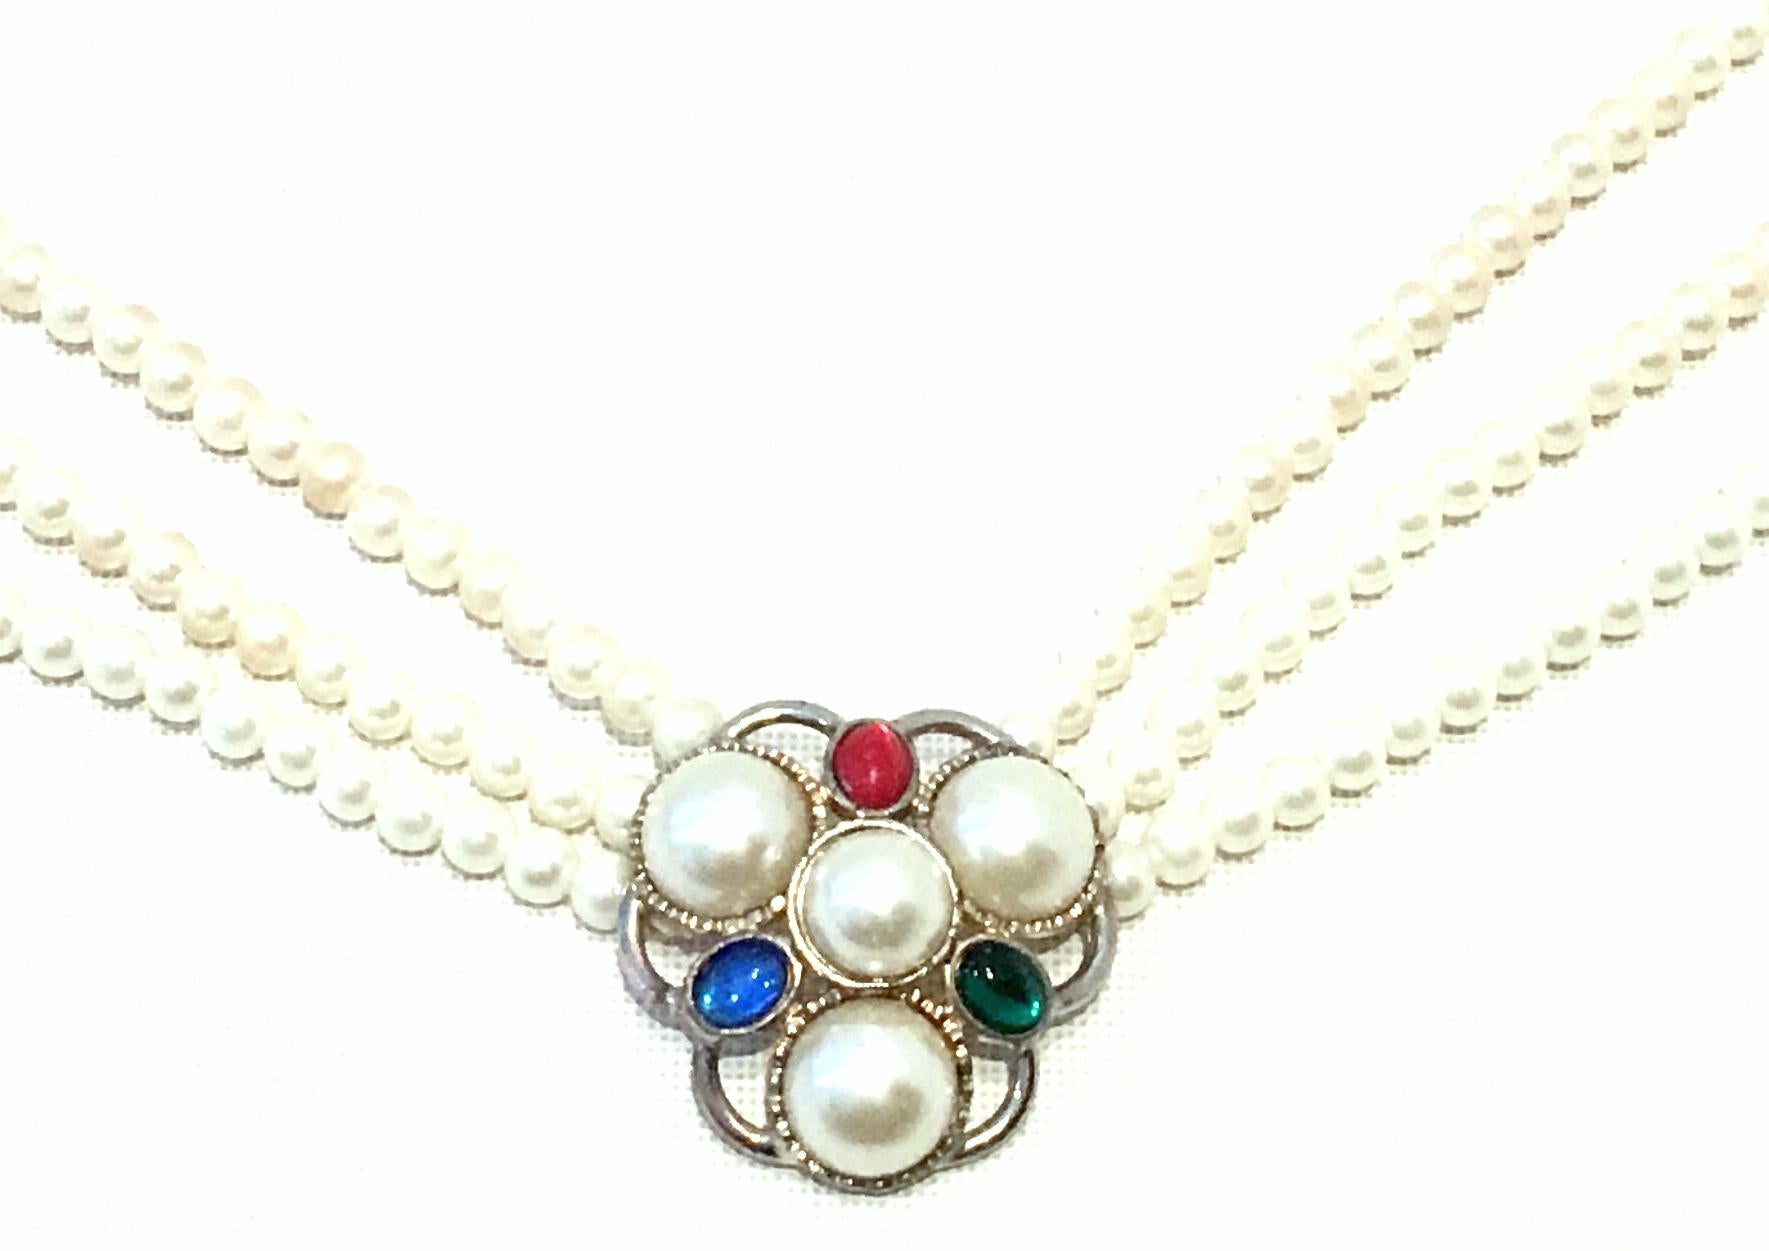 Women's or Men's Mid-20th Century Triple Strand Faux Pearl & Austrian Crystal Choker Necklace For Sale